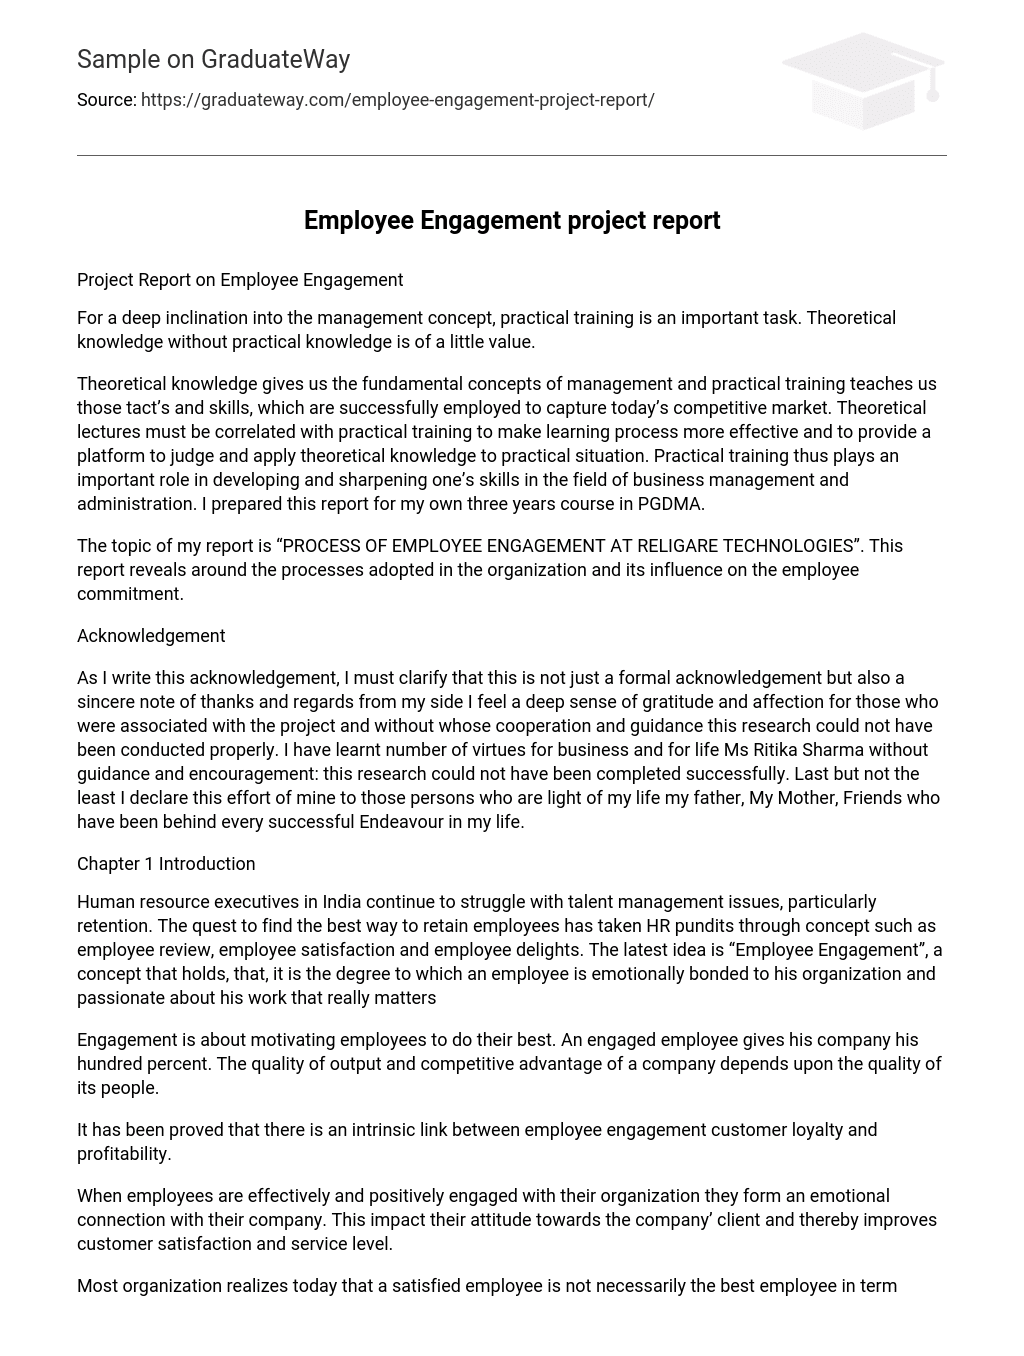 Employee Engagement project report